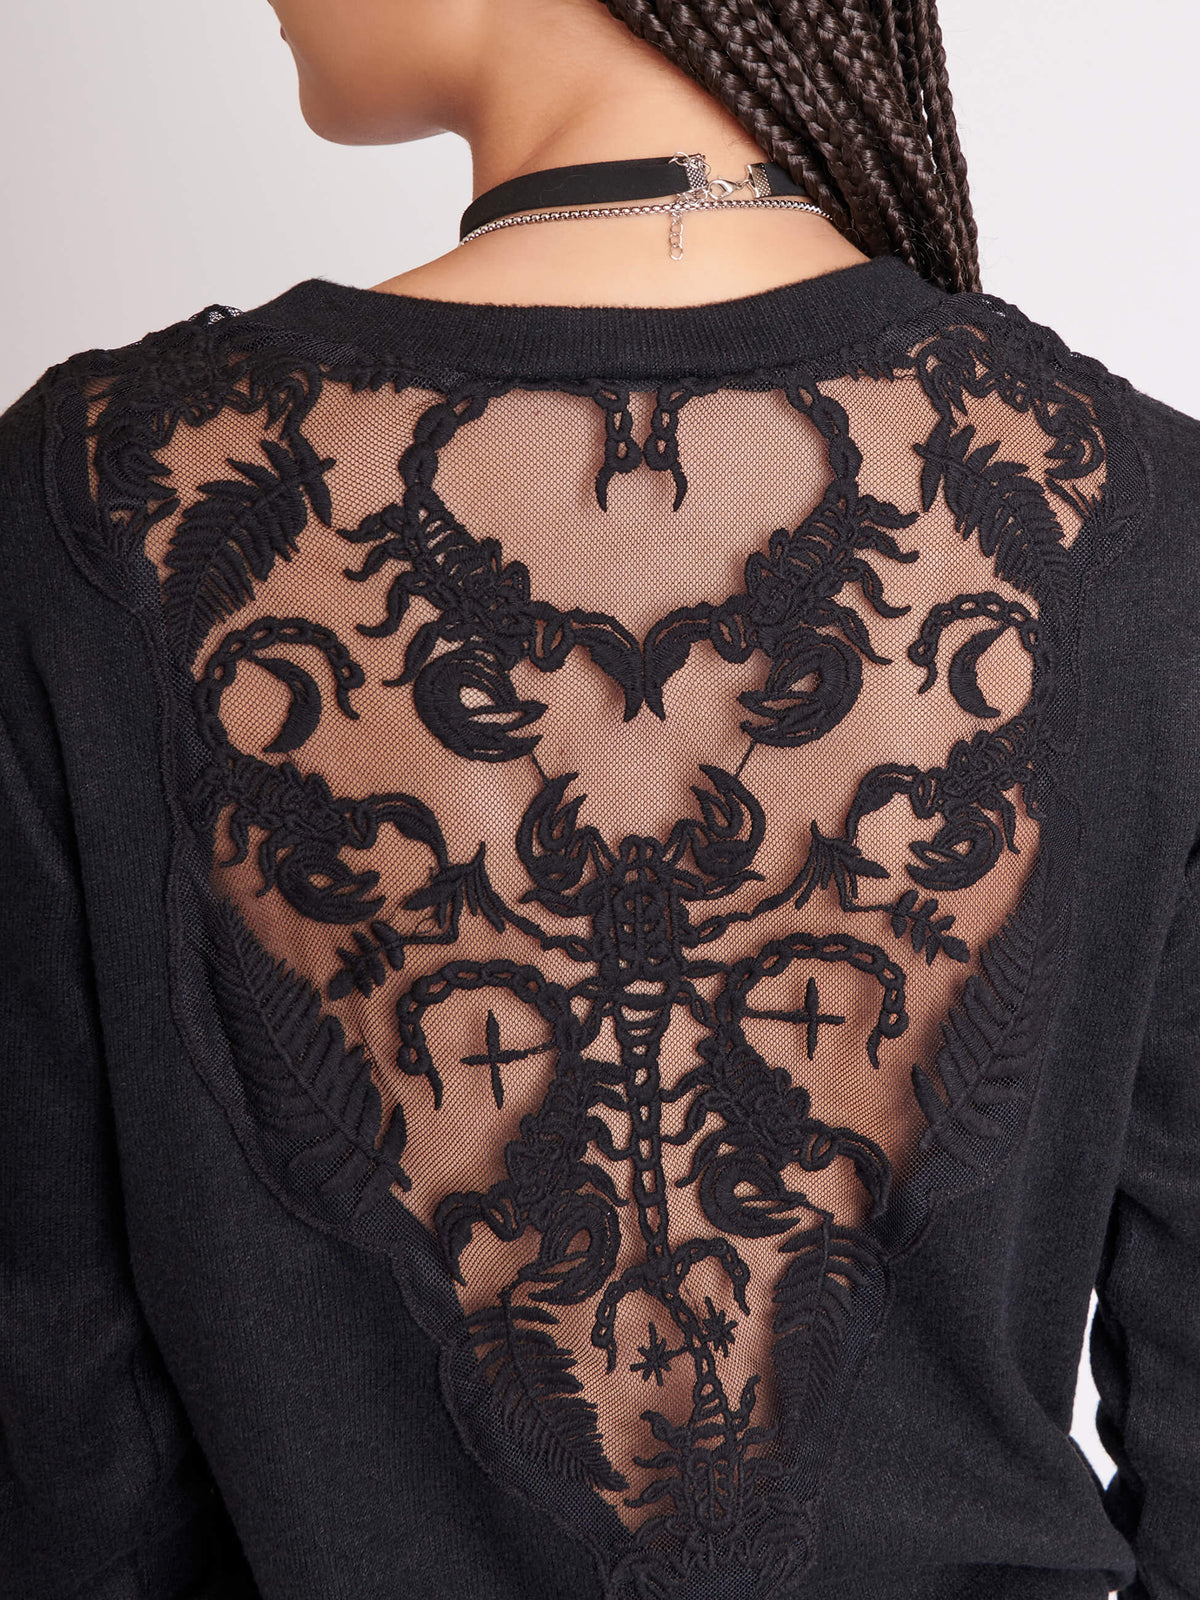 Embroidered Scorpion Sweater